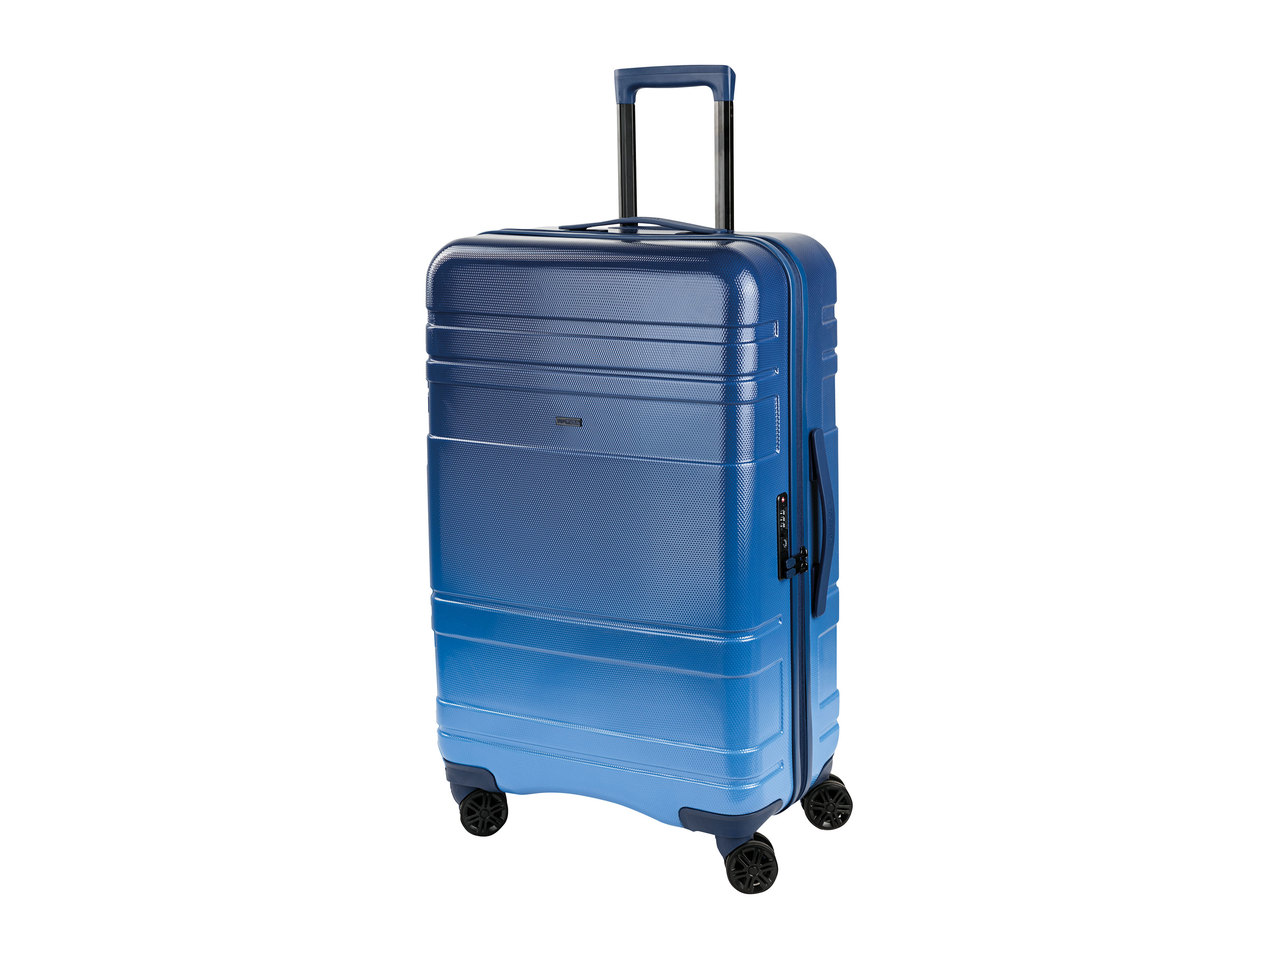 Top Move Blue Trolley Suitcase1